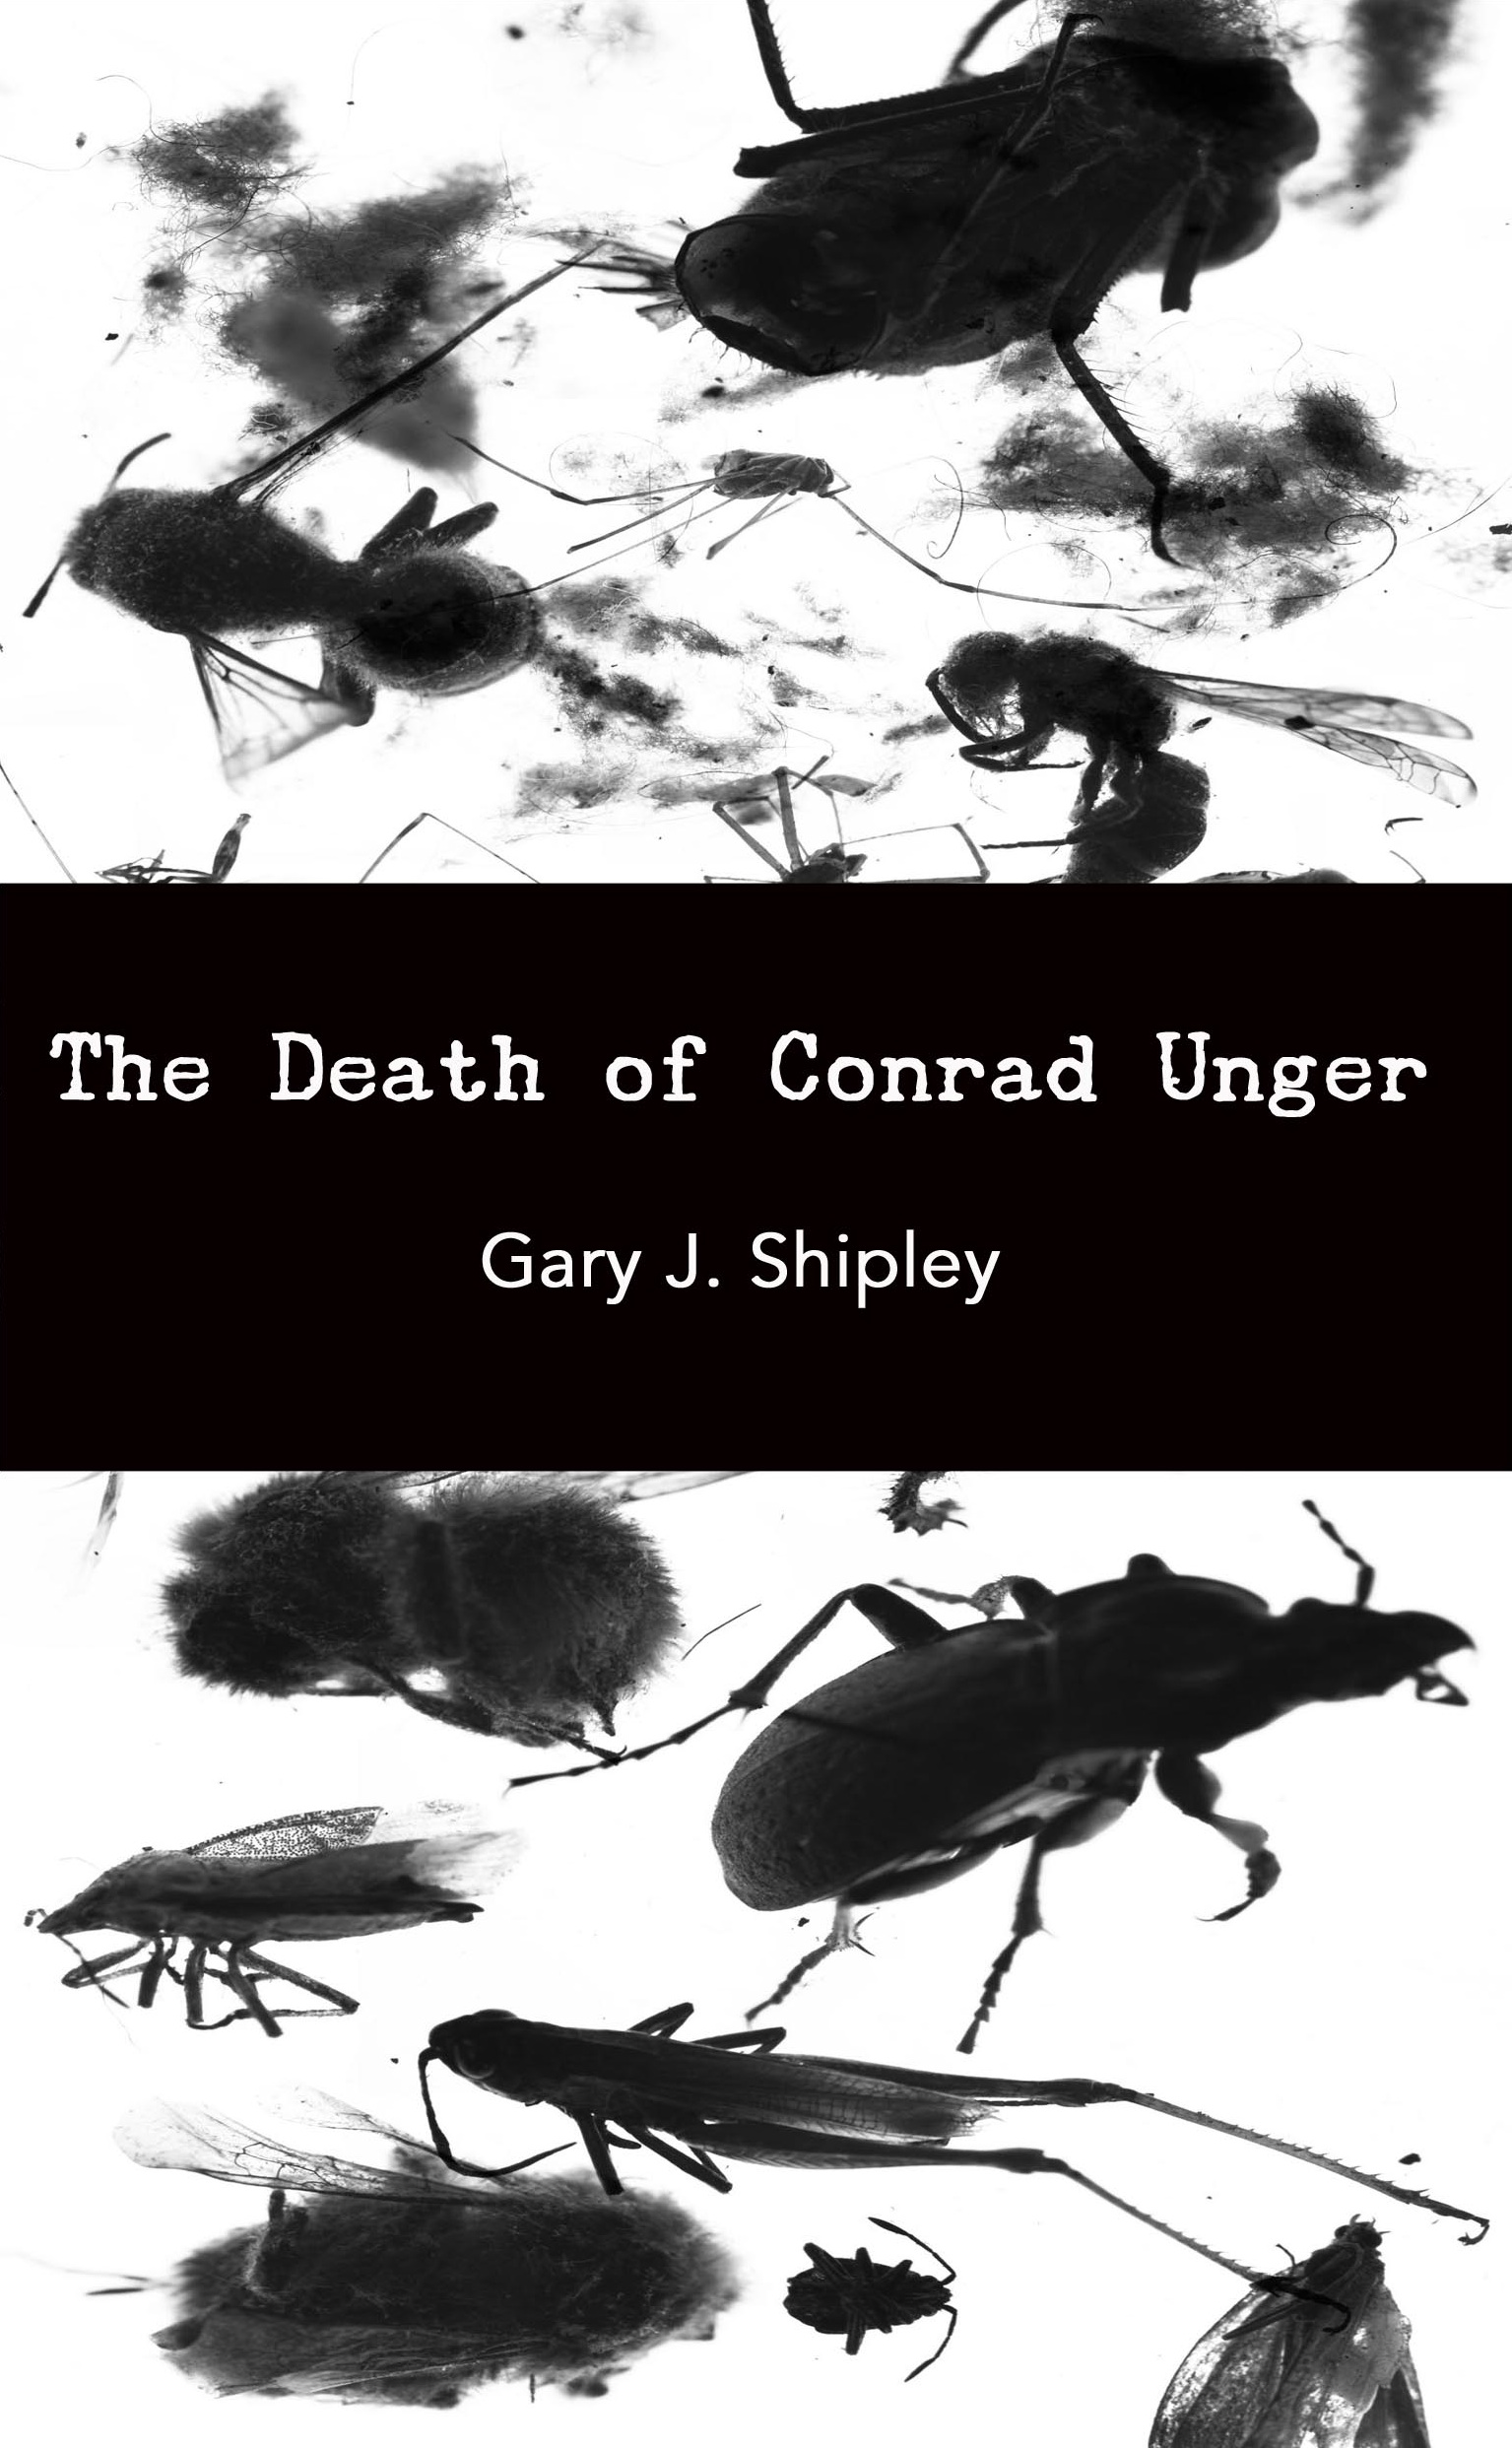 The Death of Conrad Unger: Some Conjectures Regarding Parasitosis and Associated Suicide Behavior (punctum books, 2012)